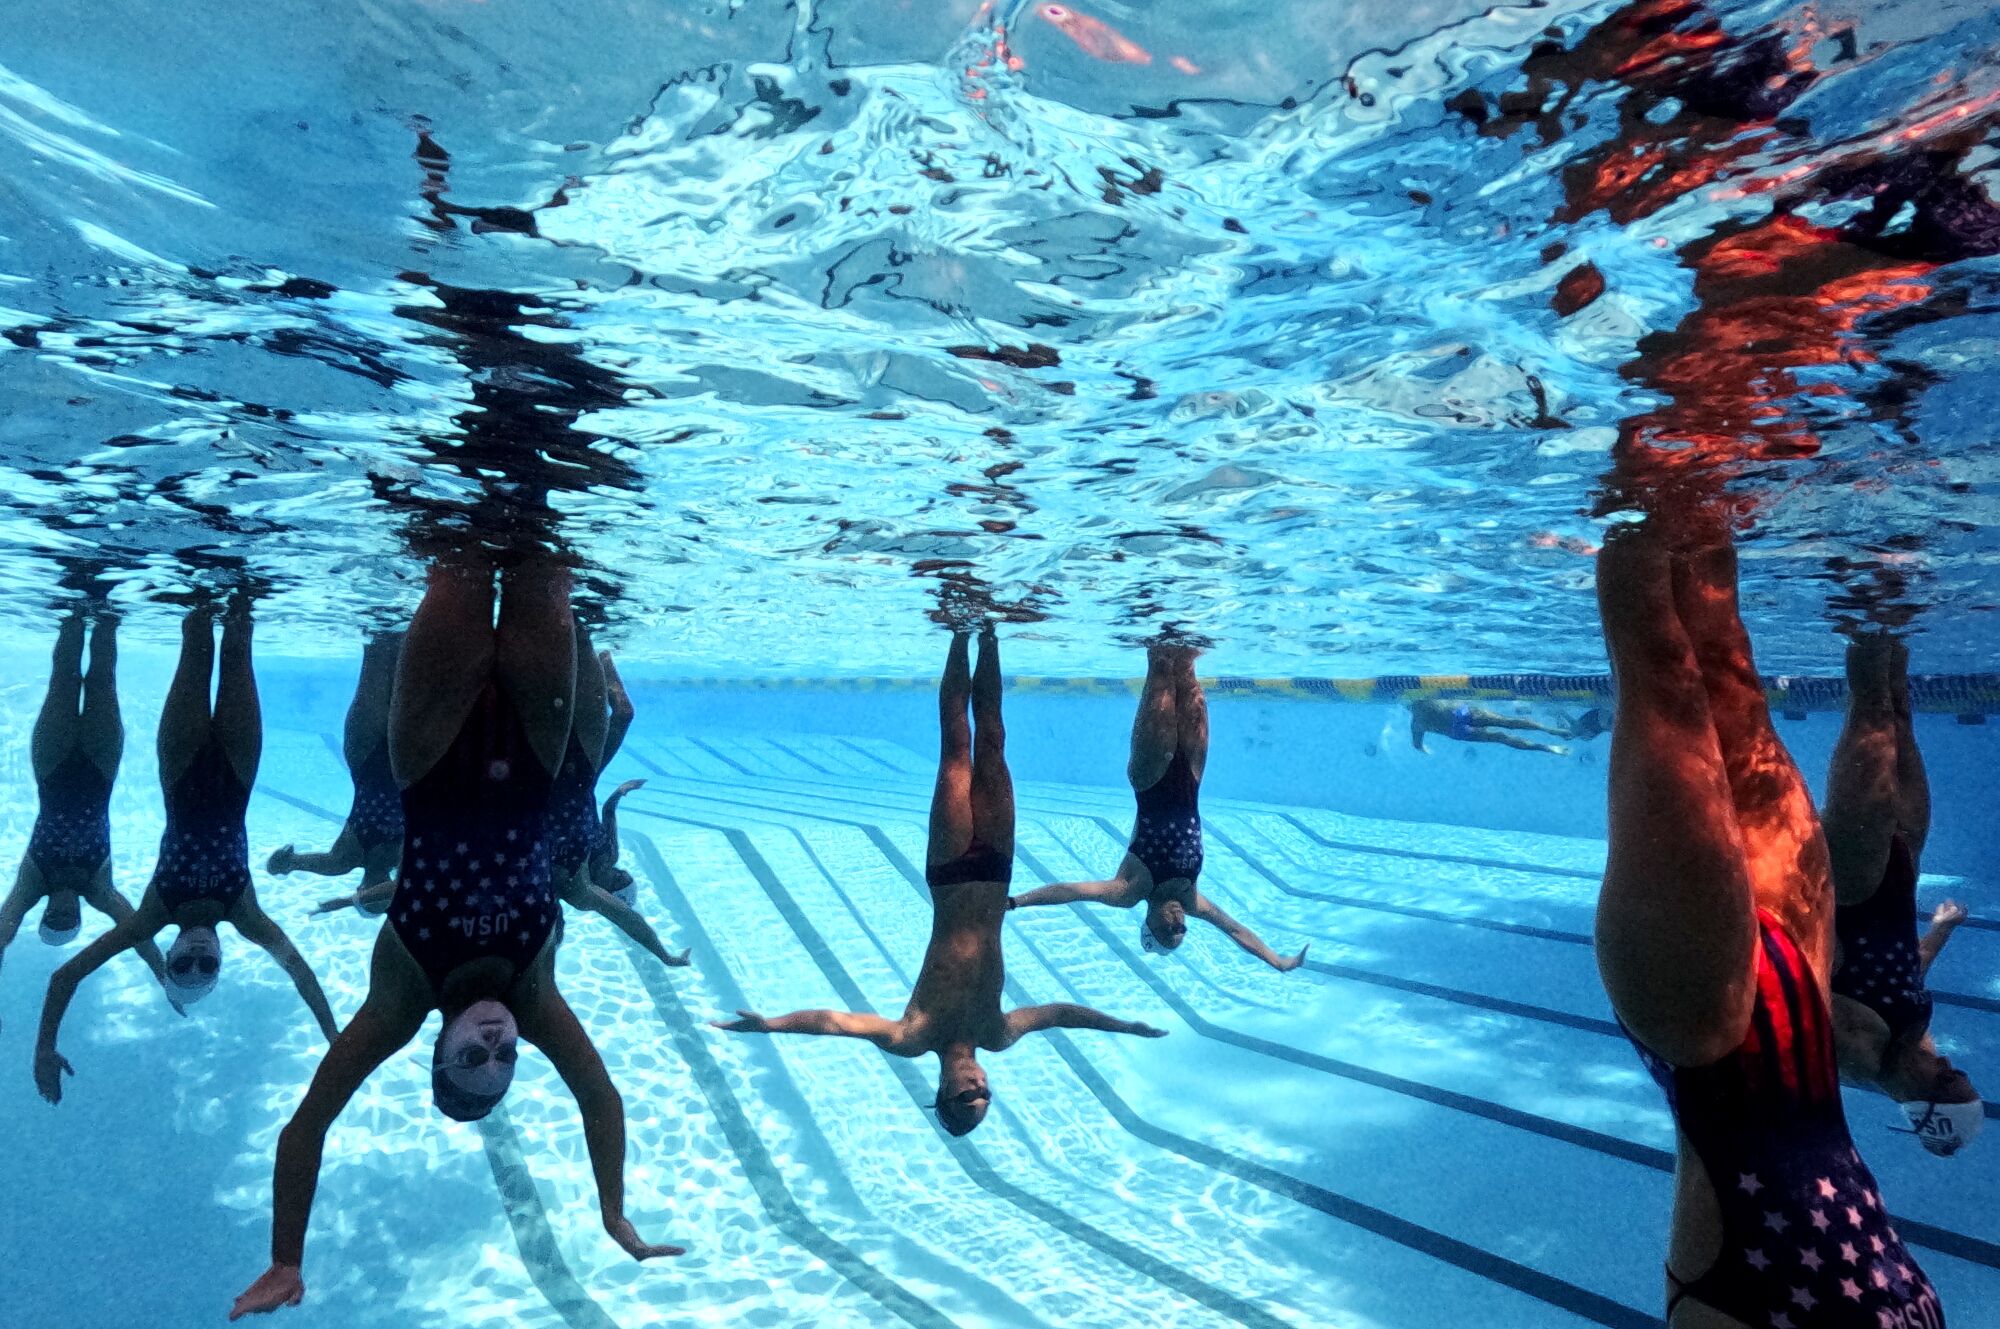 The U.S. Artistic Swimming team takes part in a recent practice at UCLA.